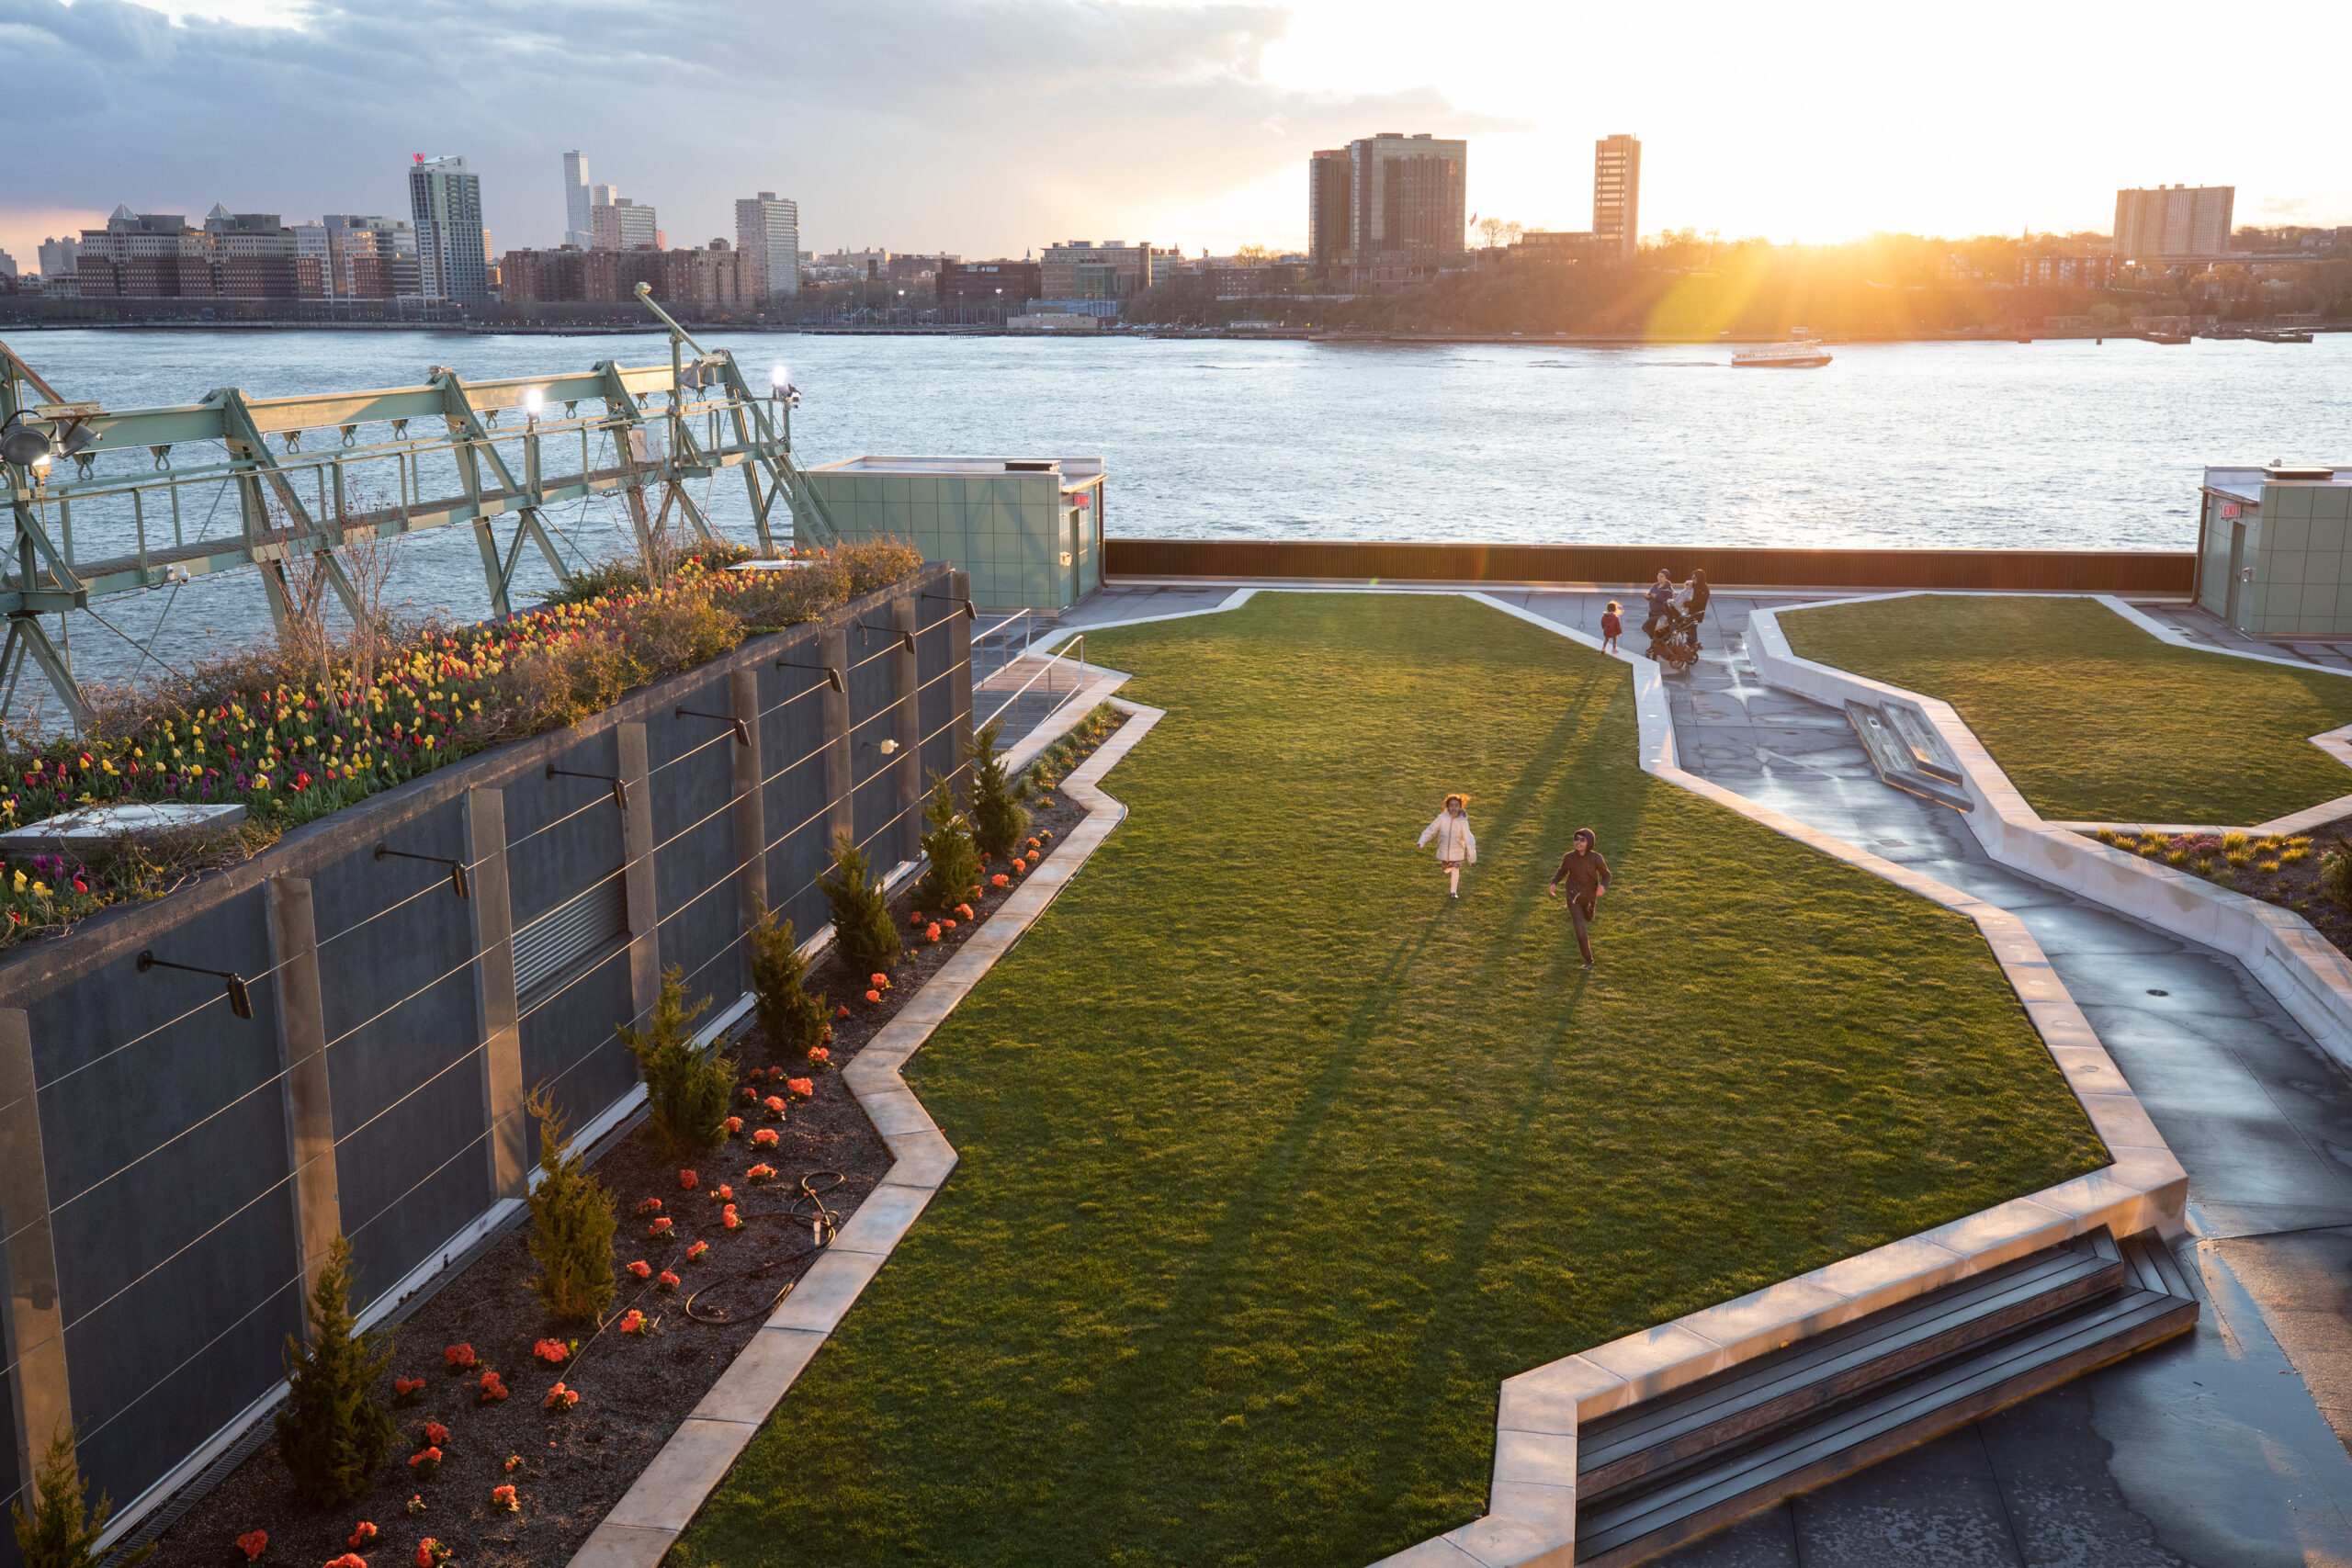 Sunset over Pier 57 Lawn